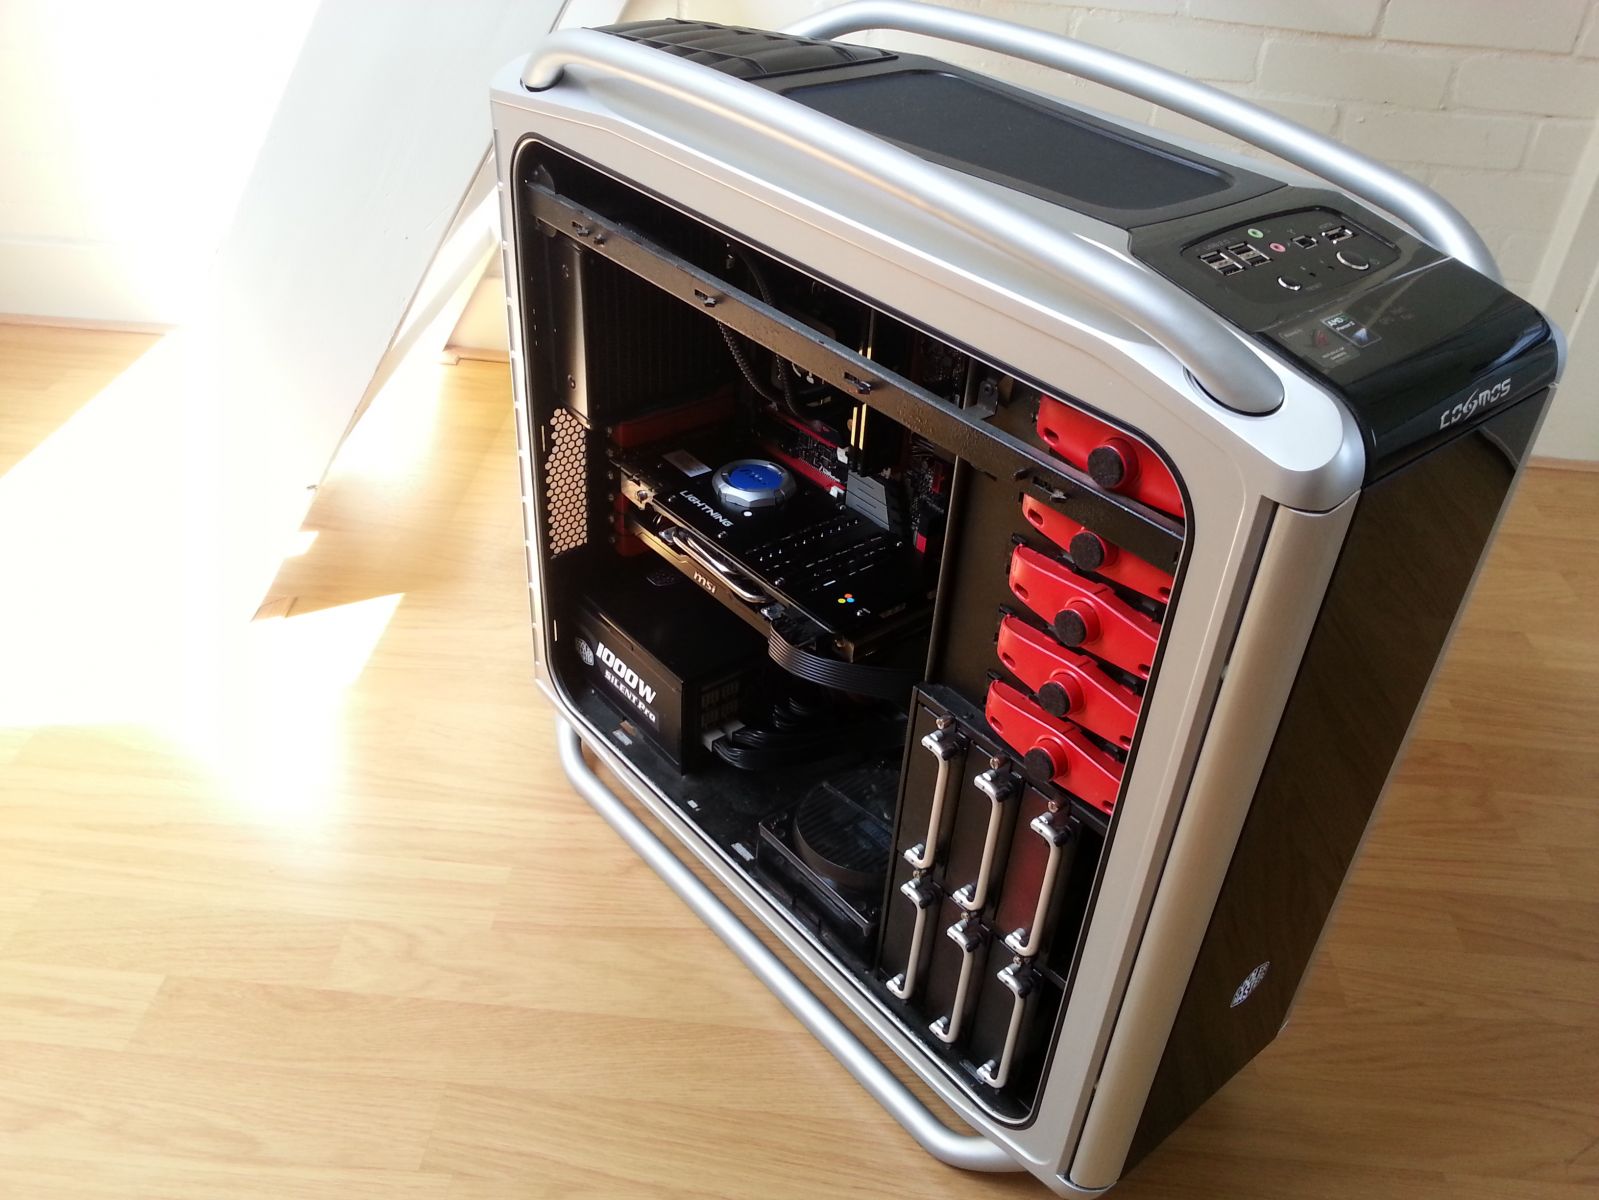 2012 - Analog's second gaming rig